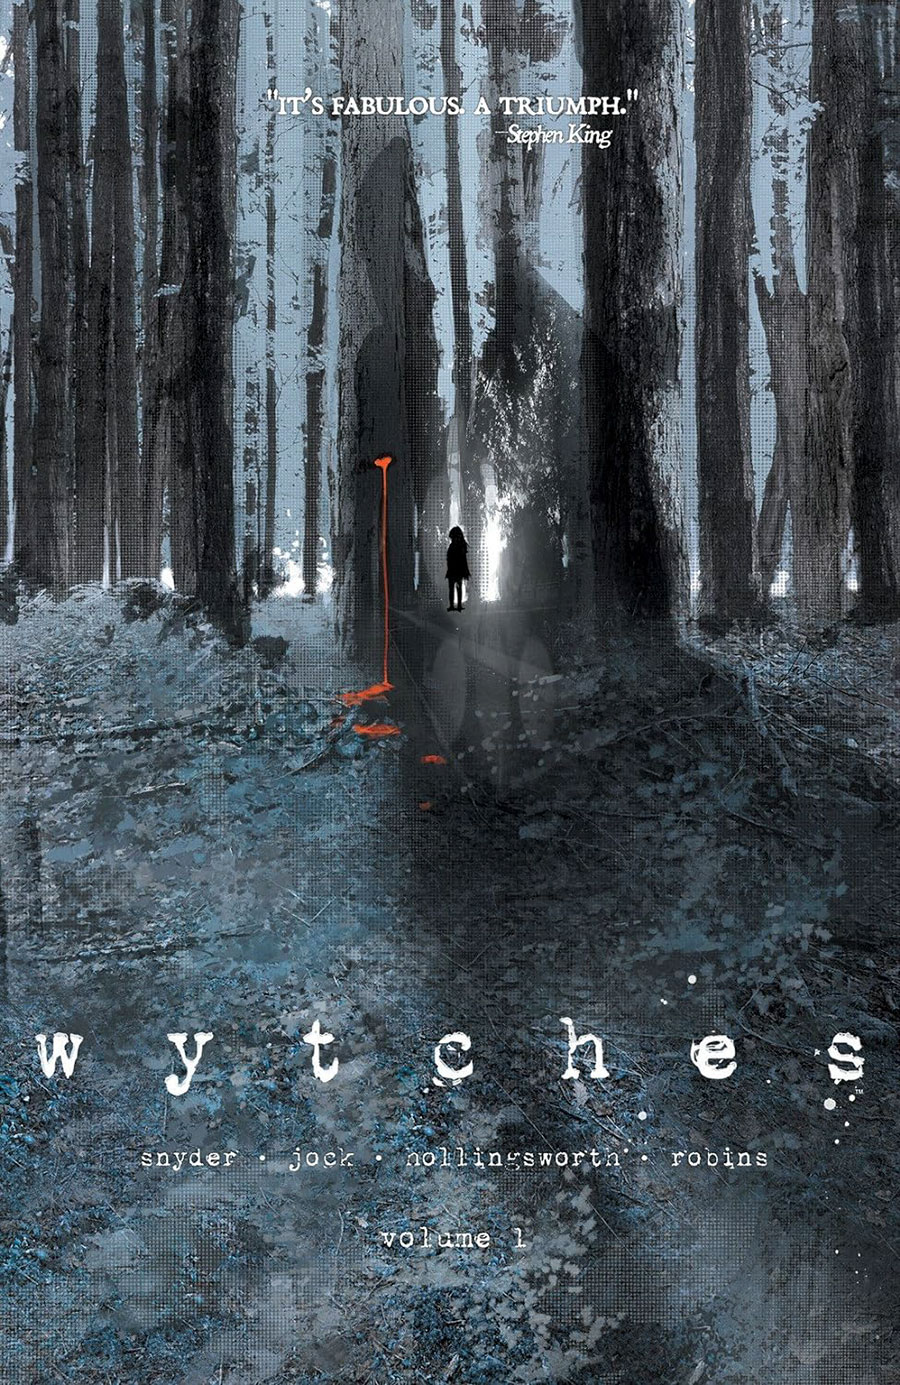 Wytches Vol 1 HC Convention Exclusive Edition